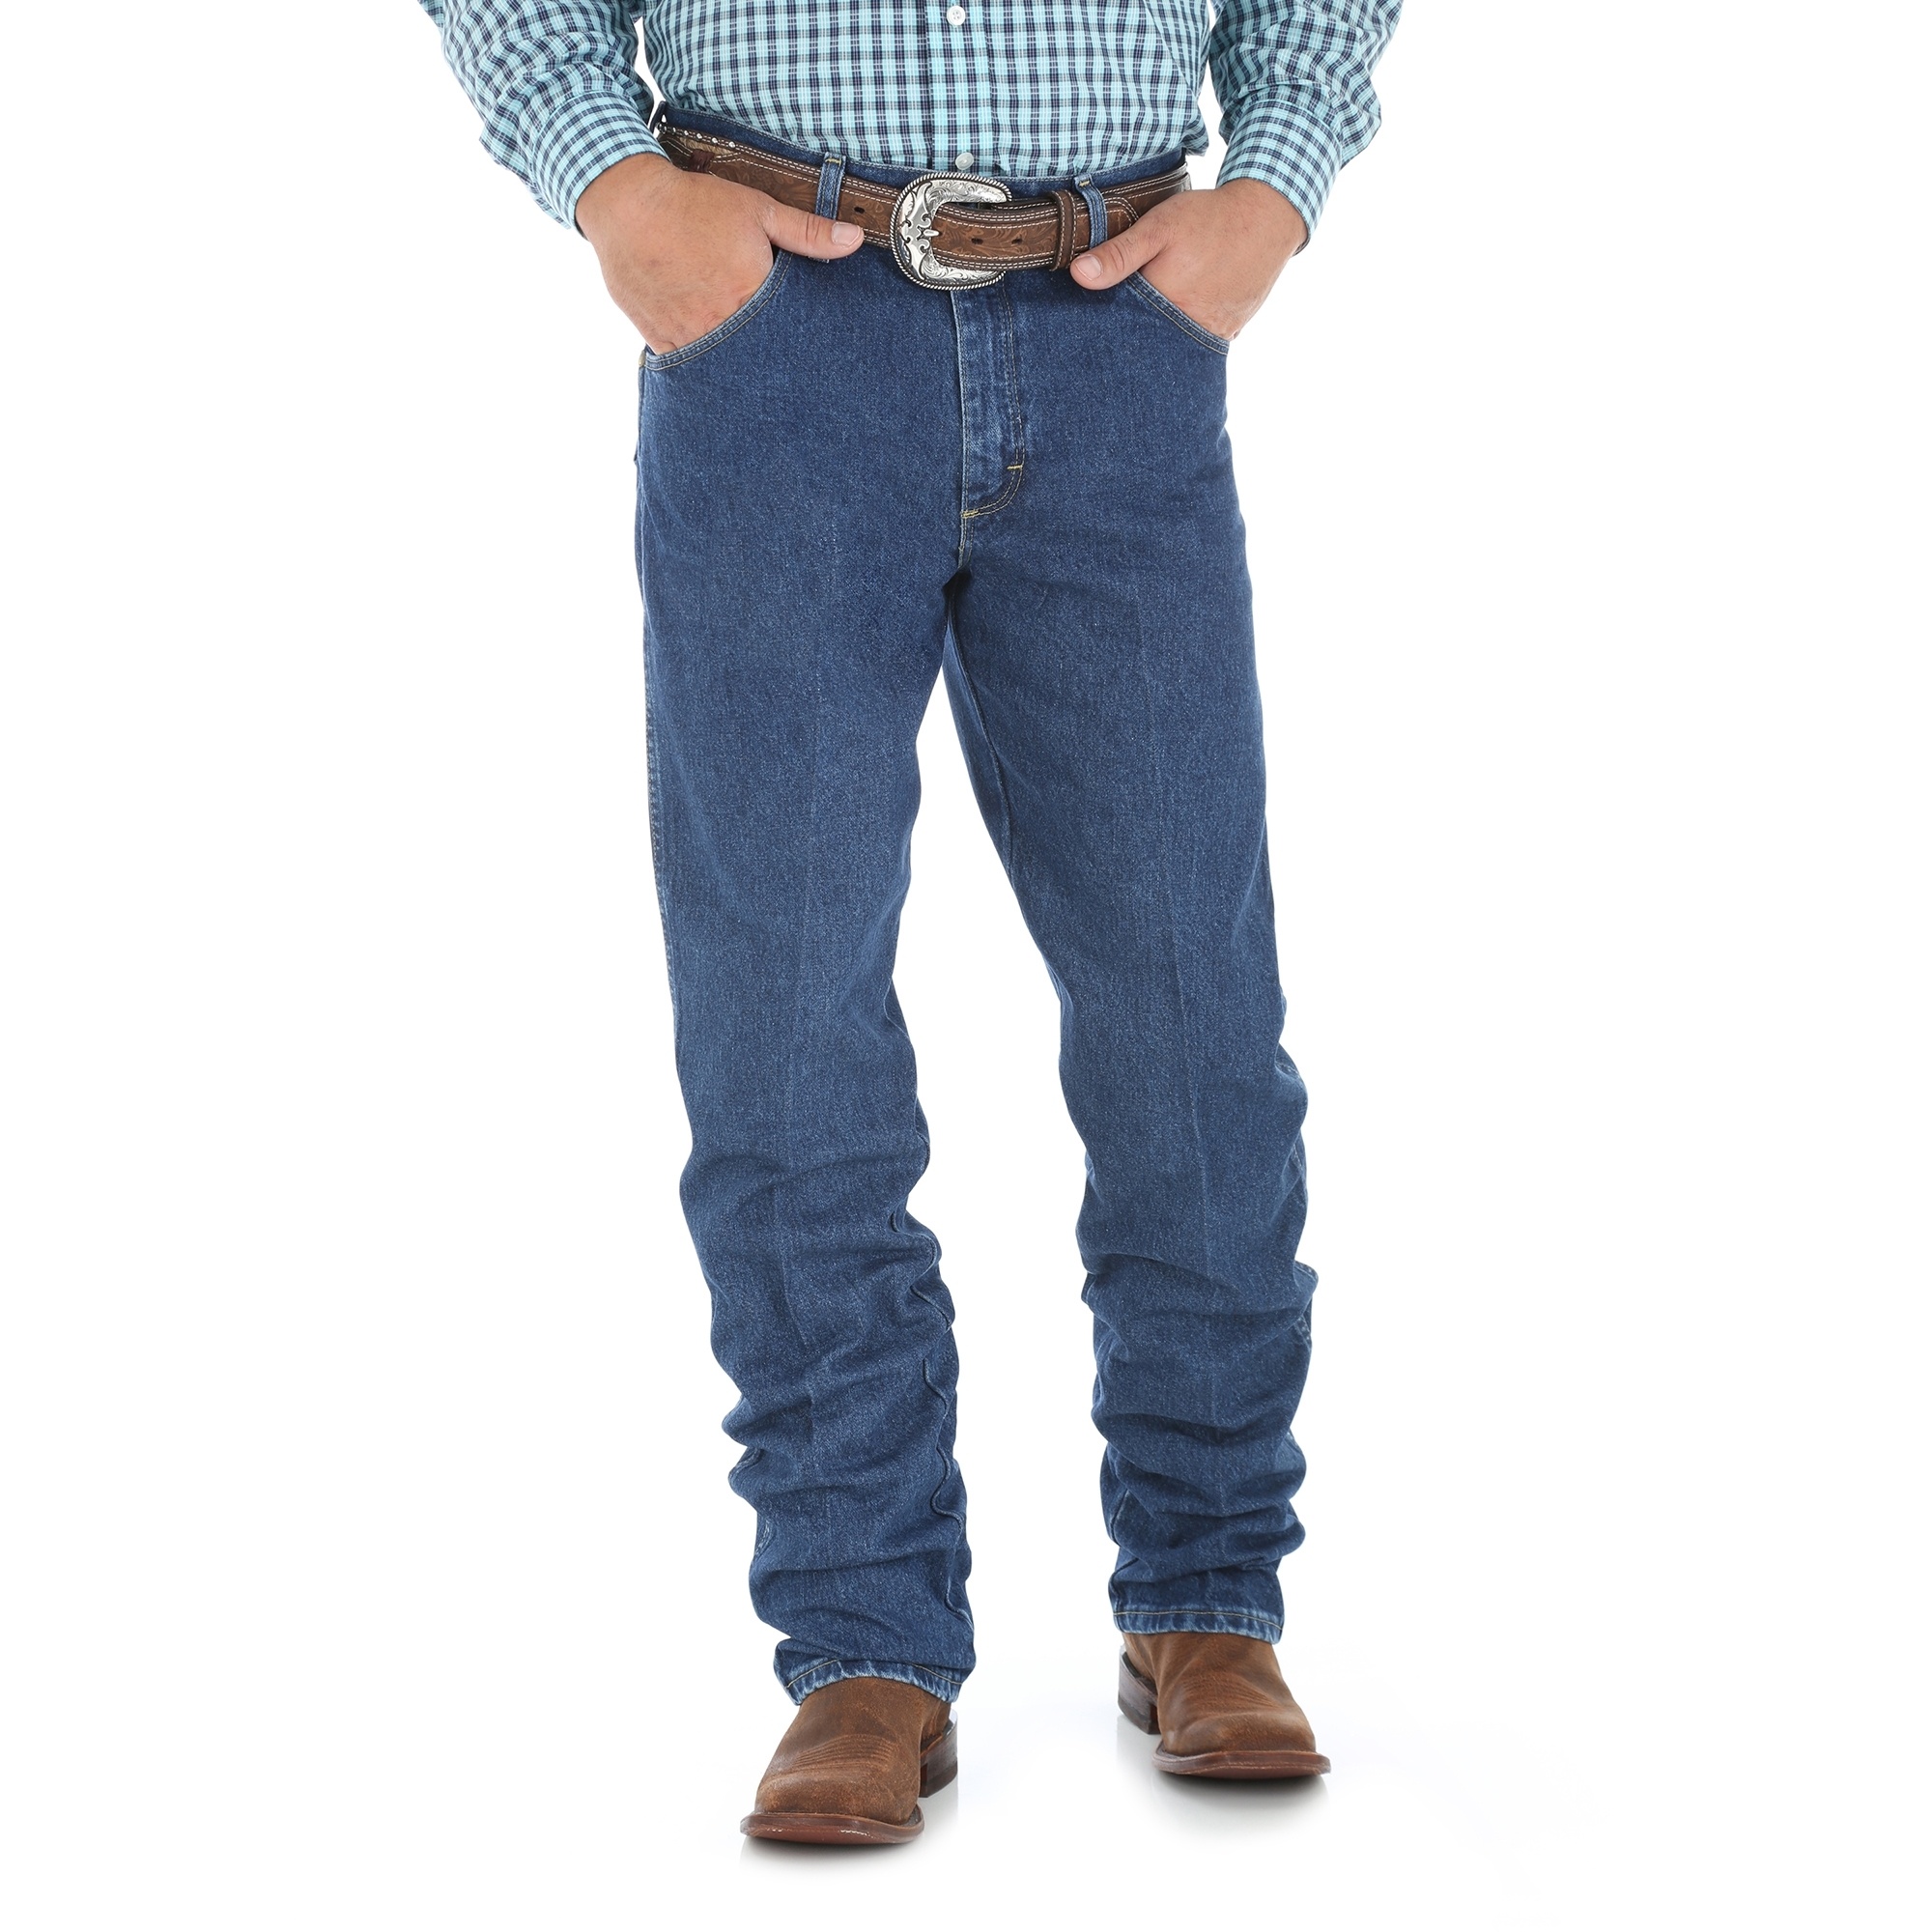 Wrangler Mens George Strait Cowboy Cut Relaxed Fit Jeans - Frontier ...